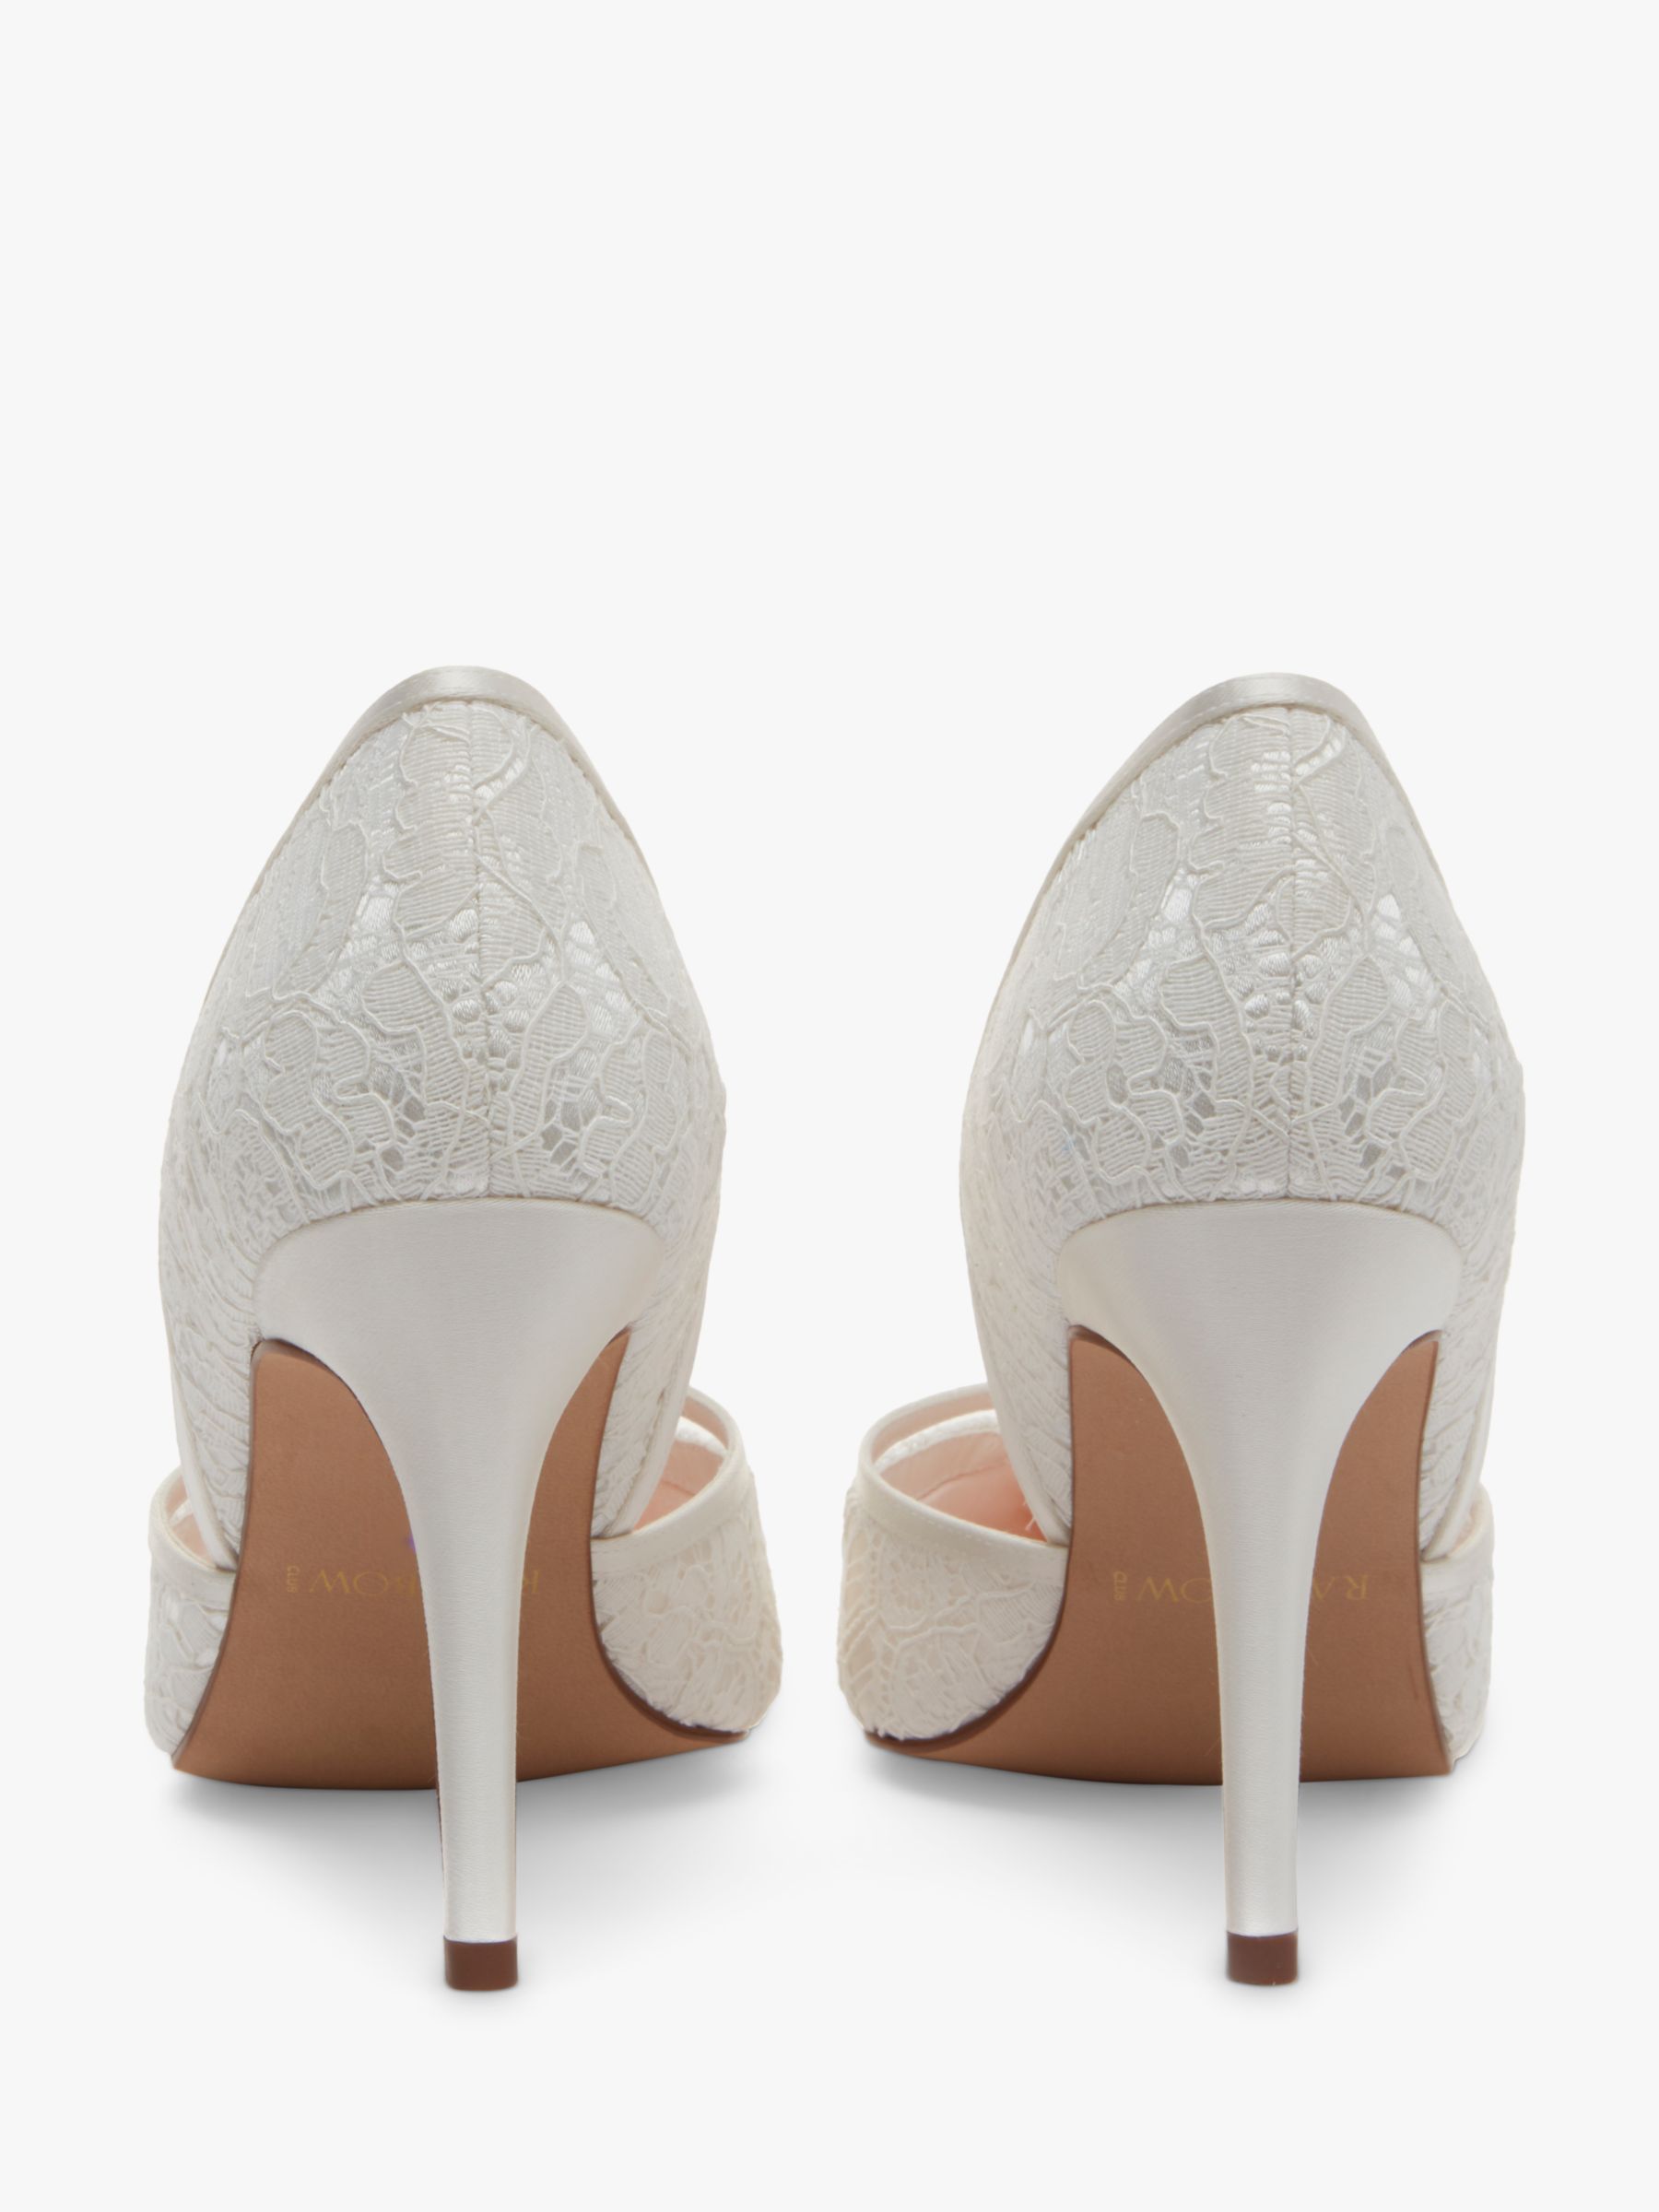 Rainbow Club Georgia Luxury Lace Pointed Court Shoes, Ivory, 3